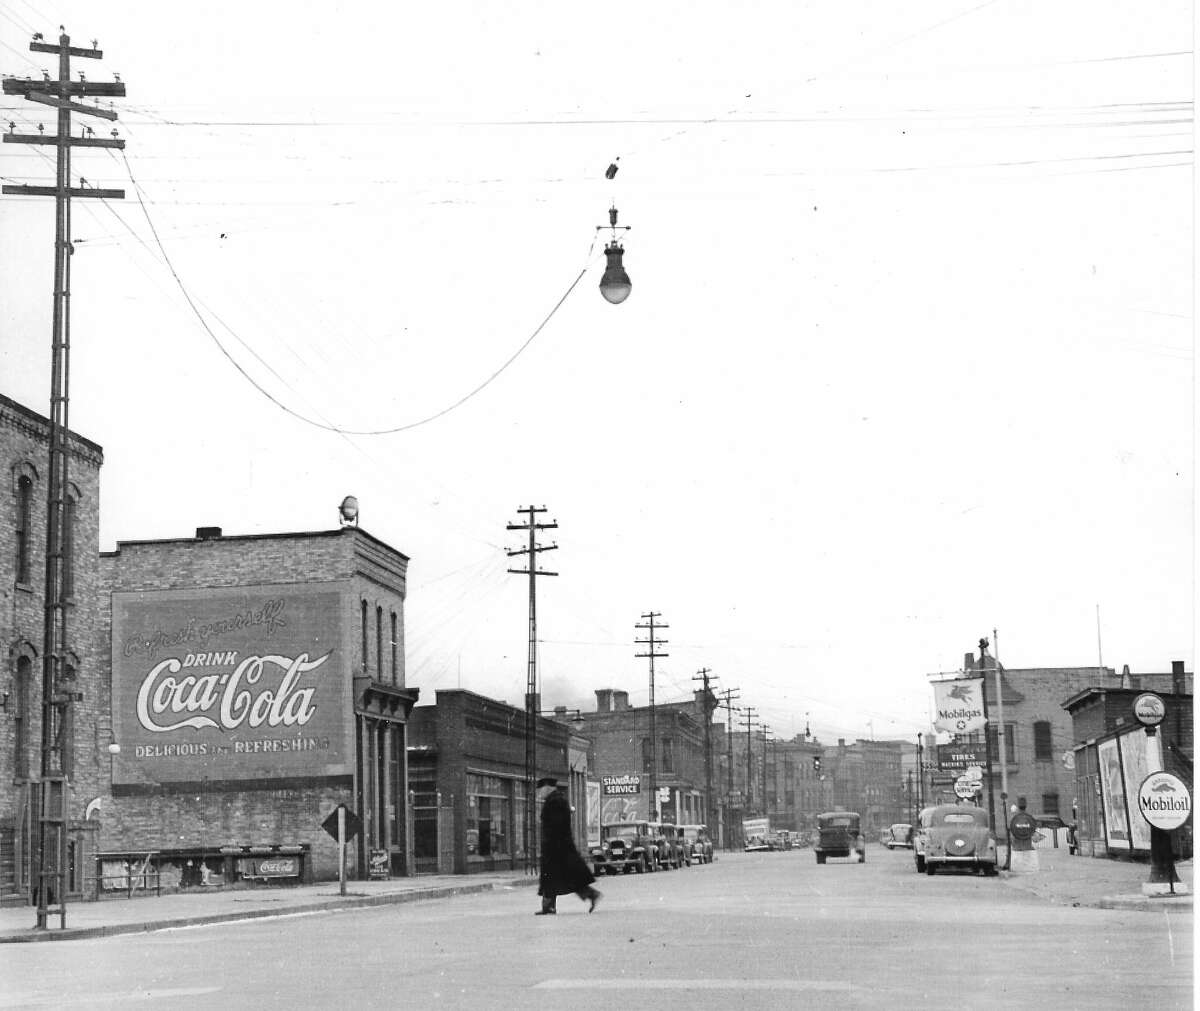 This photo shows a view looking west on River Street near the corner of Smith and River Street around the late 1930s. The building with the Coca-Cola billboard attached is 289 River St.